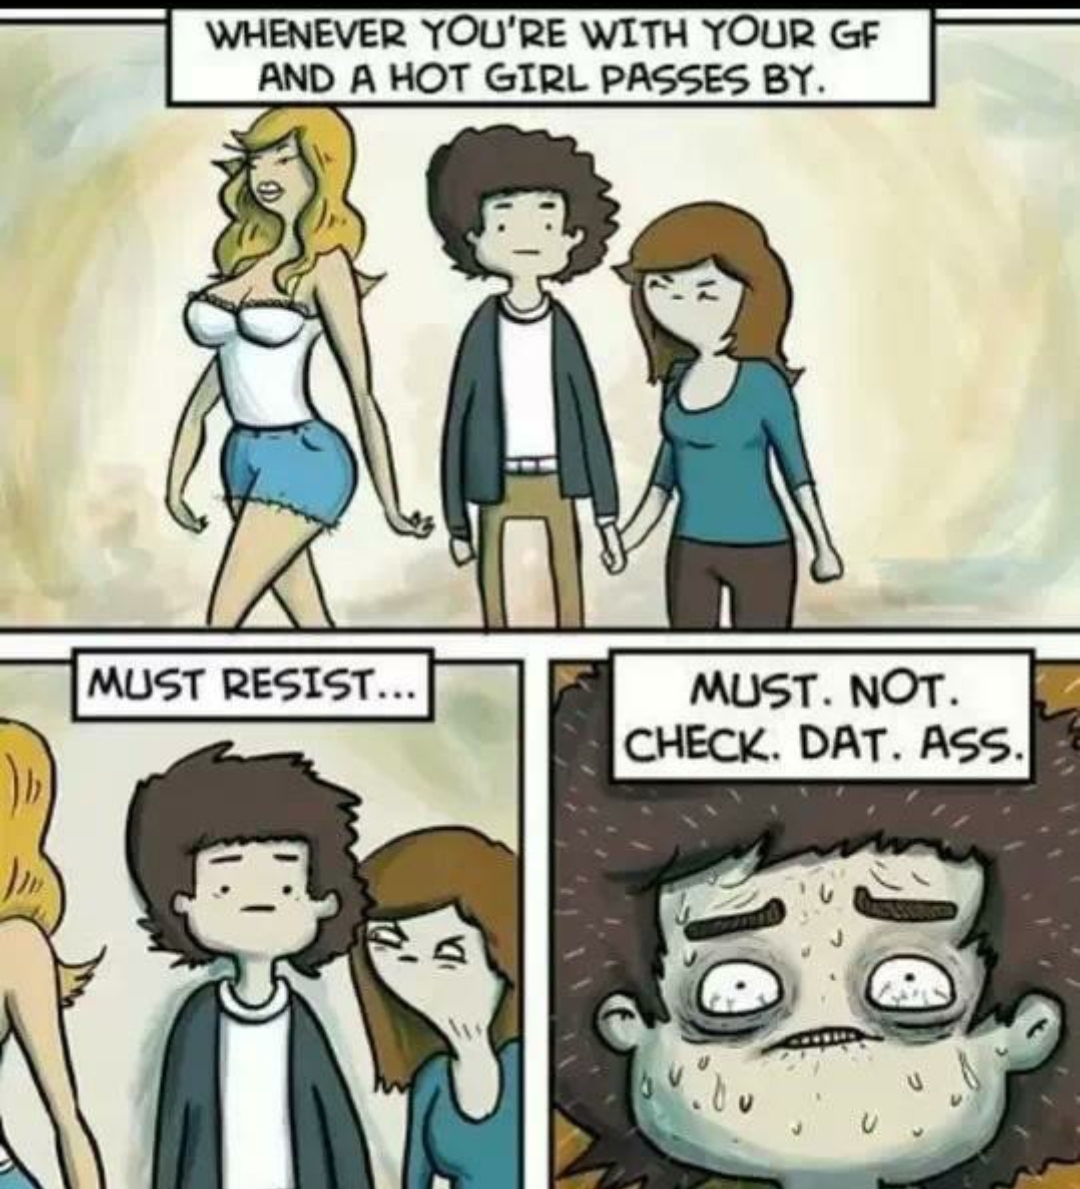 cringeworthy pics - hot girl passes by meme - Whenever You'Re With Your Gf And A Hot Girl Passes By. Must Resist... Must. Not. Check. Dat. Ass. 10 e